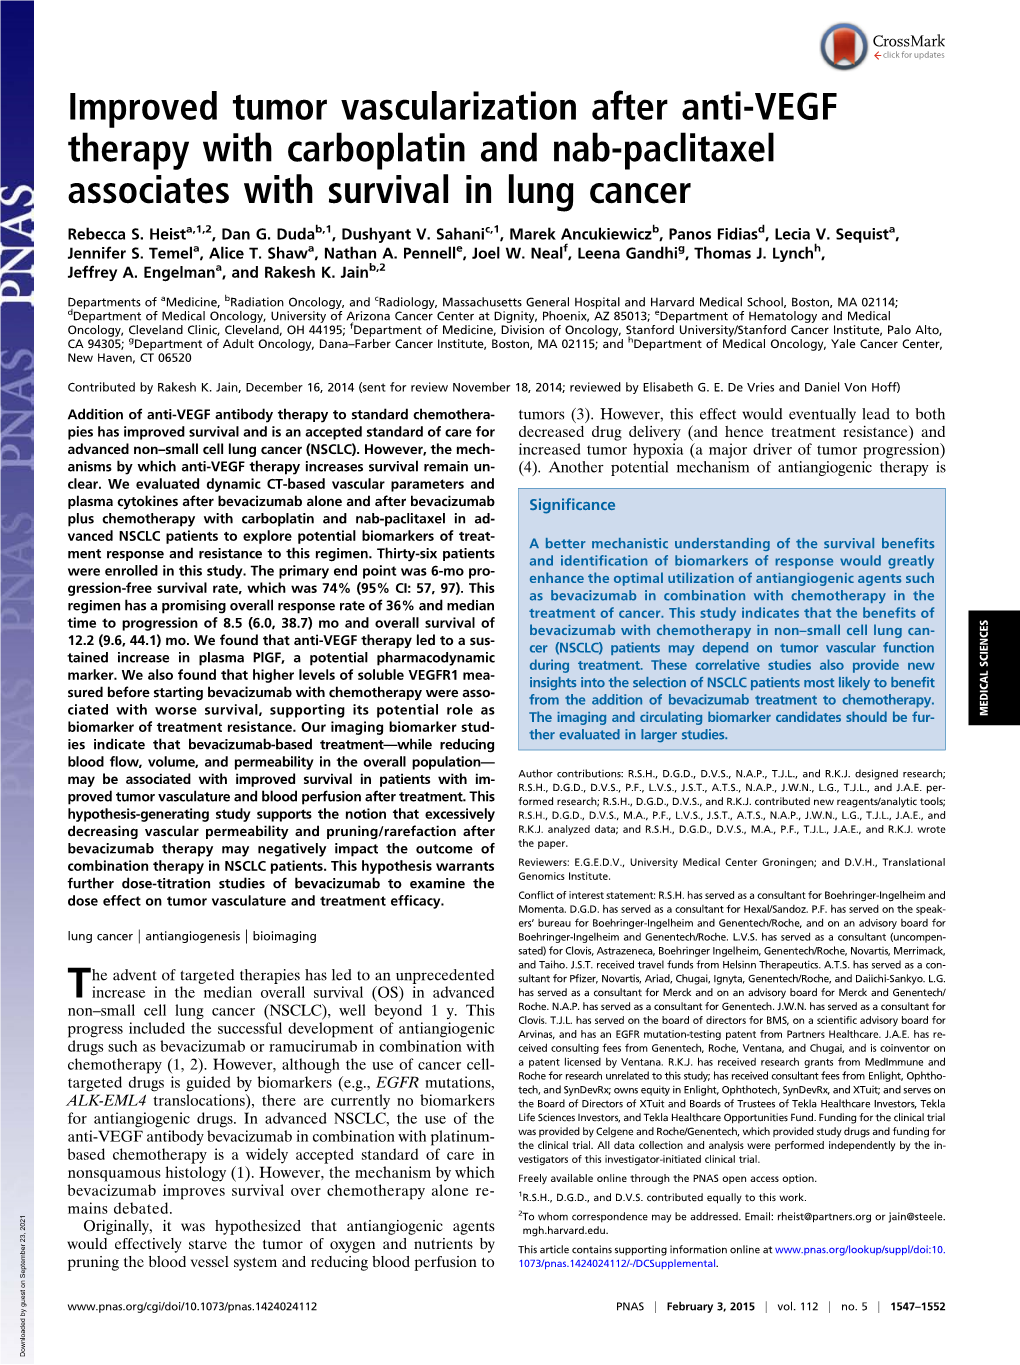 Improved Tumor Vascularization After Anti-VEGF Therapy with Carboplatin and Nab-Paclitaxel Associates with Survival in Lung Cancer